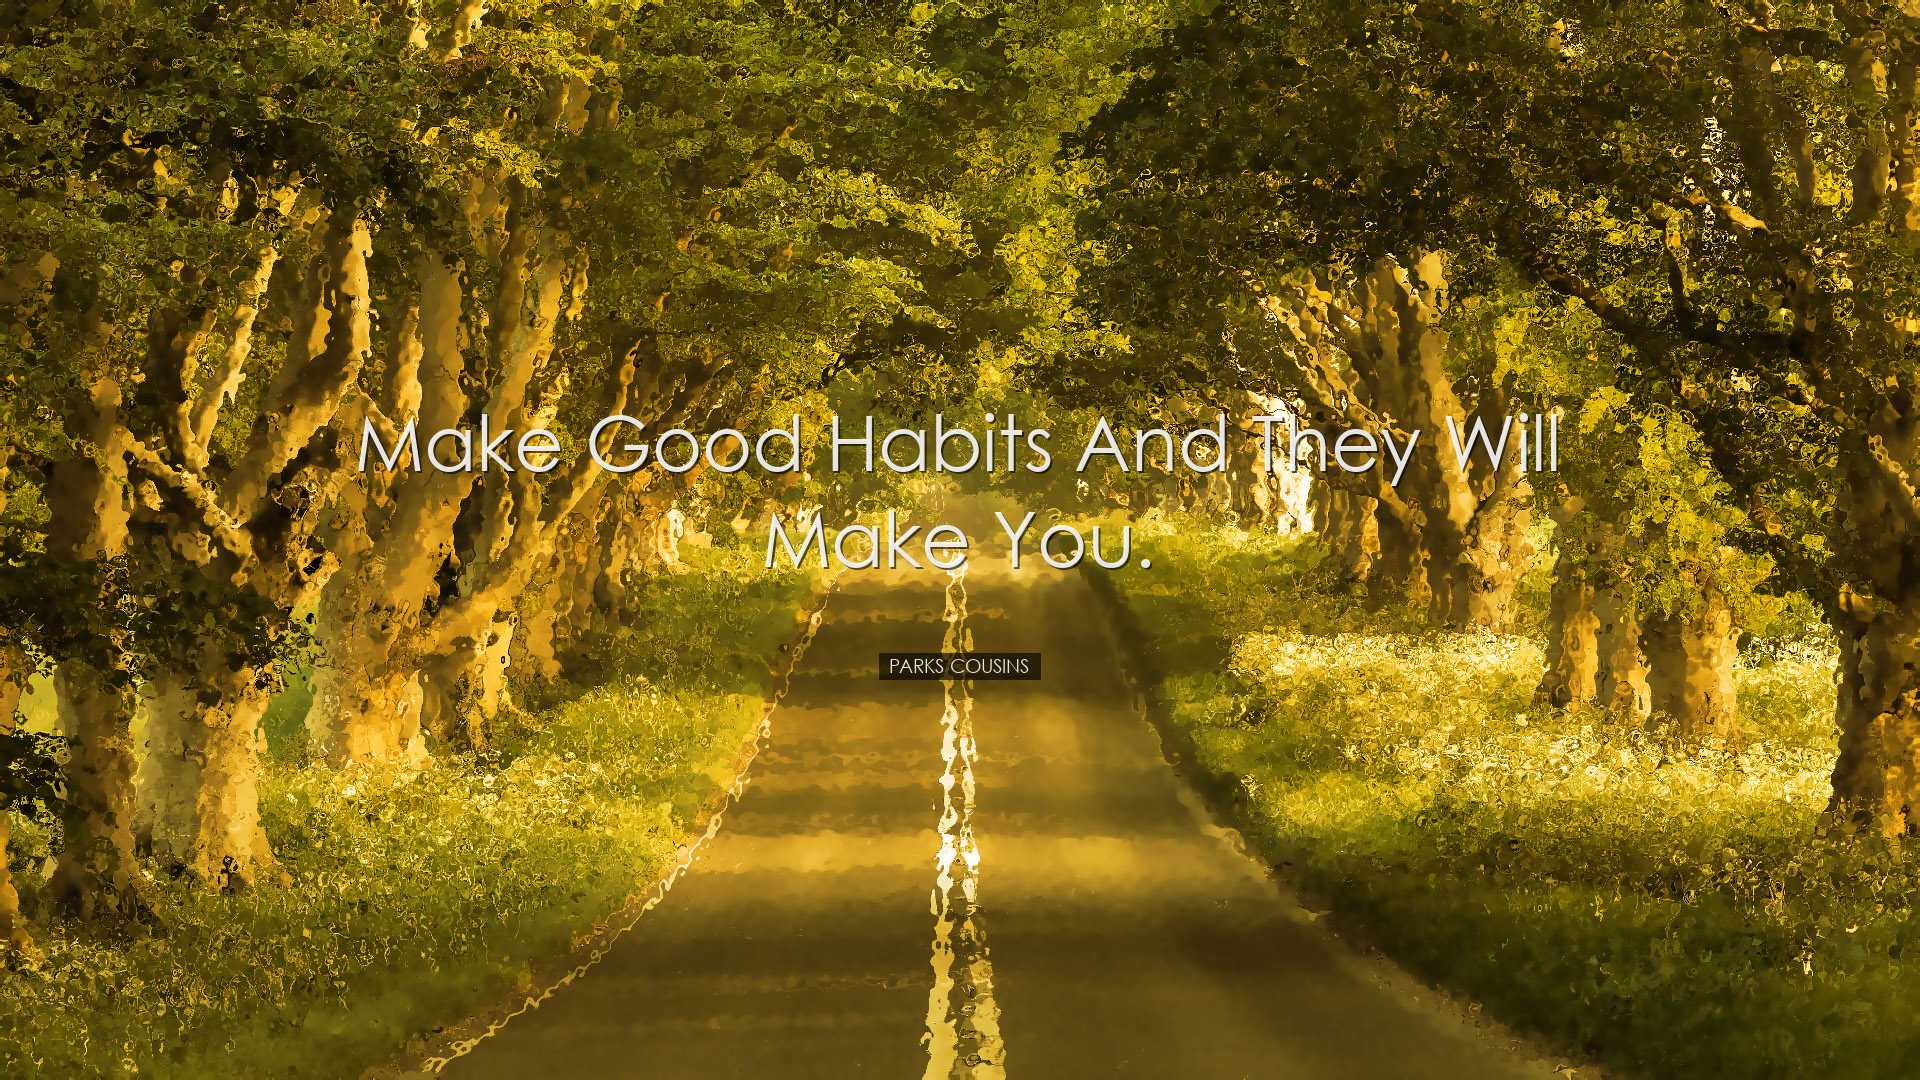 Make good habits and they will make you. - Parks Cousins